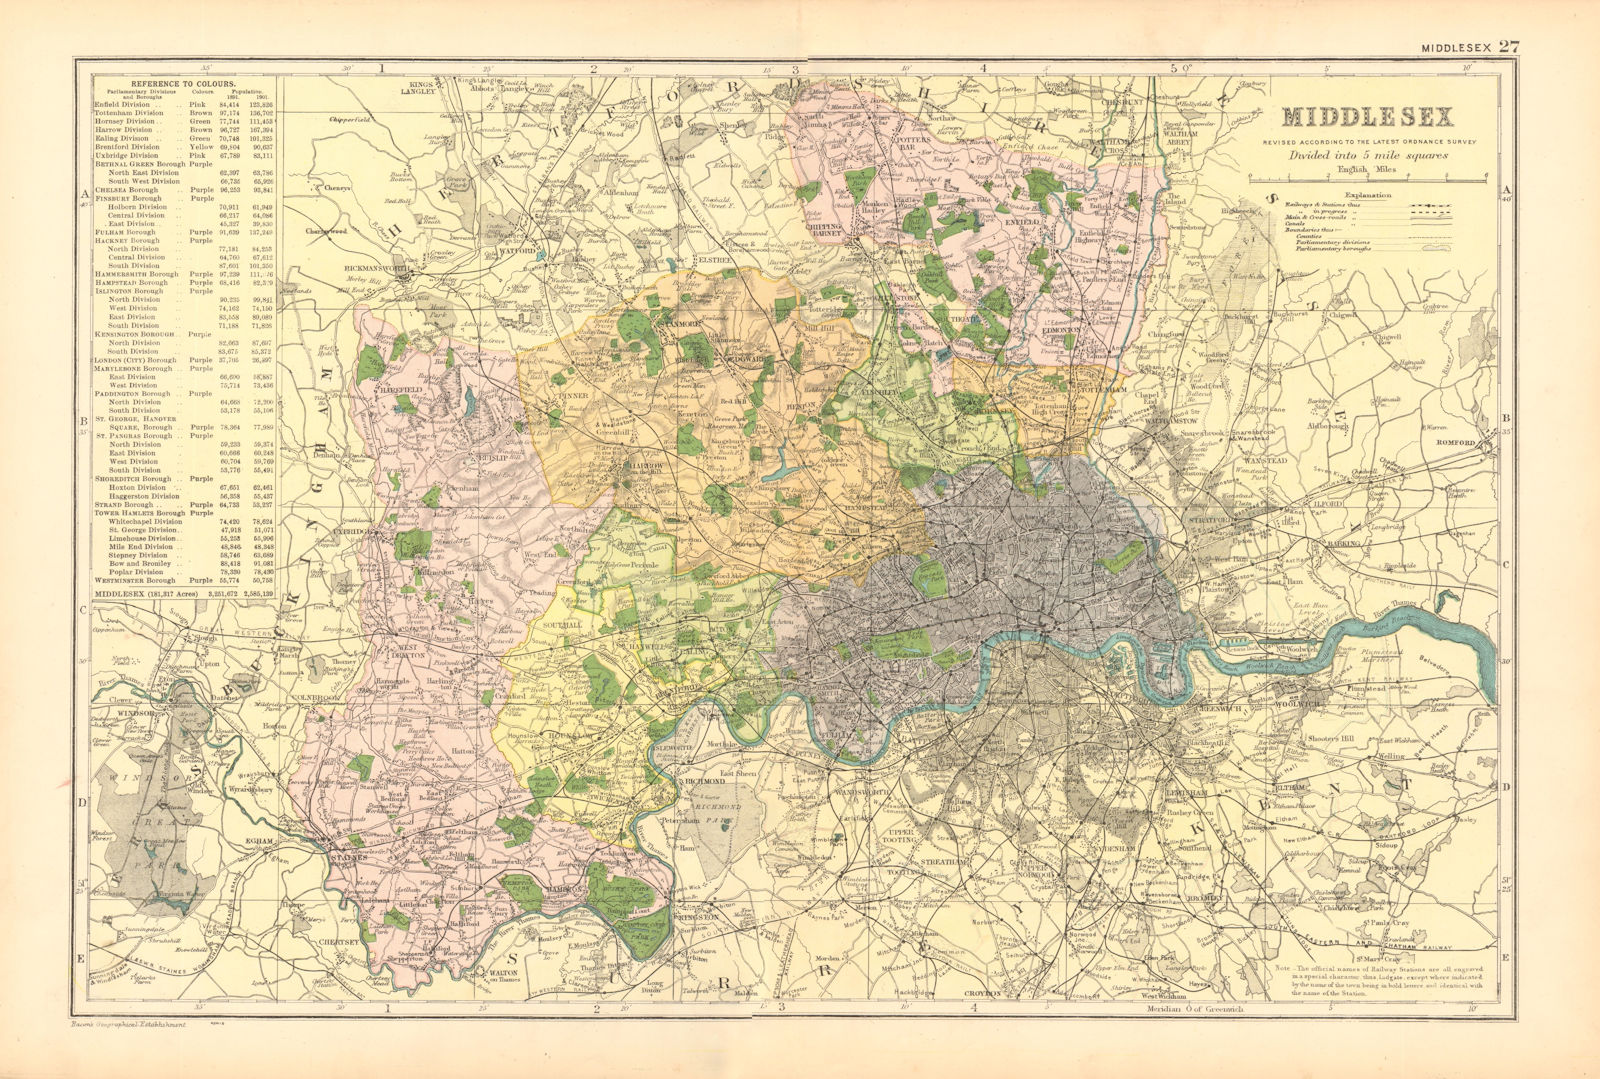 MIDDLESEX showing Parliamentary divisions,boroughs & parks.London.BACON 1904 map